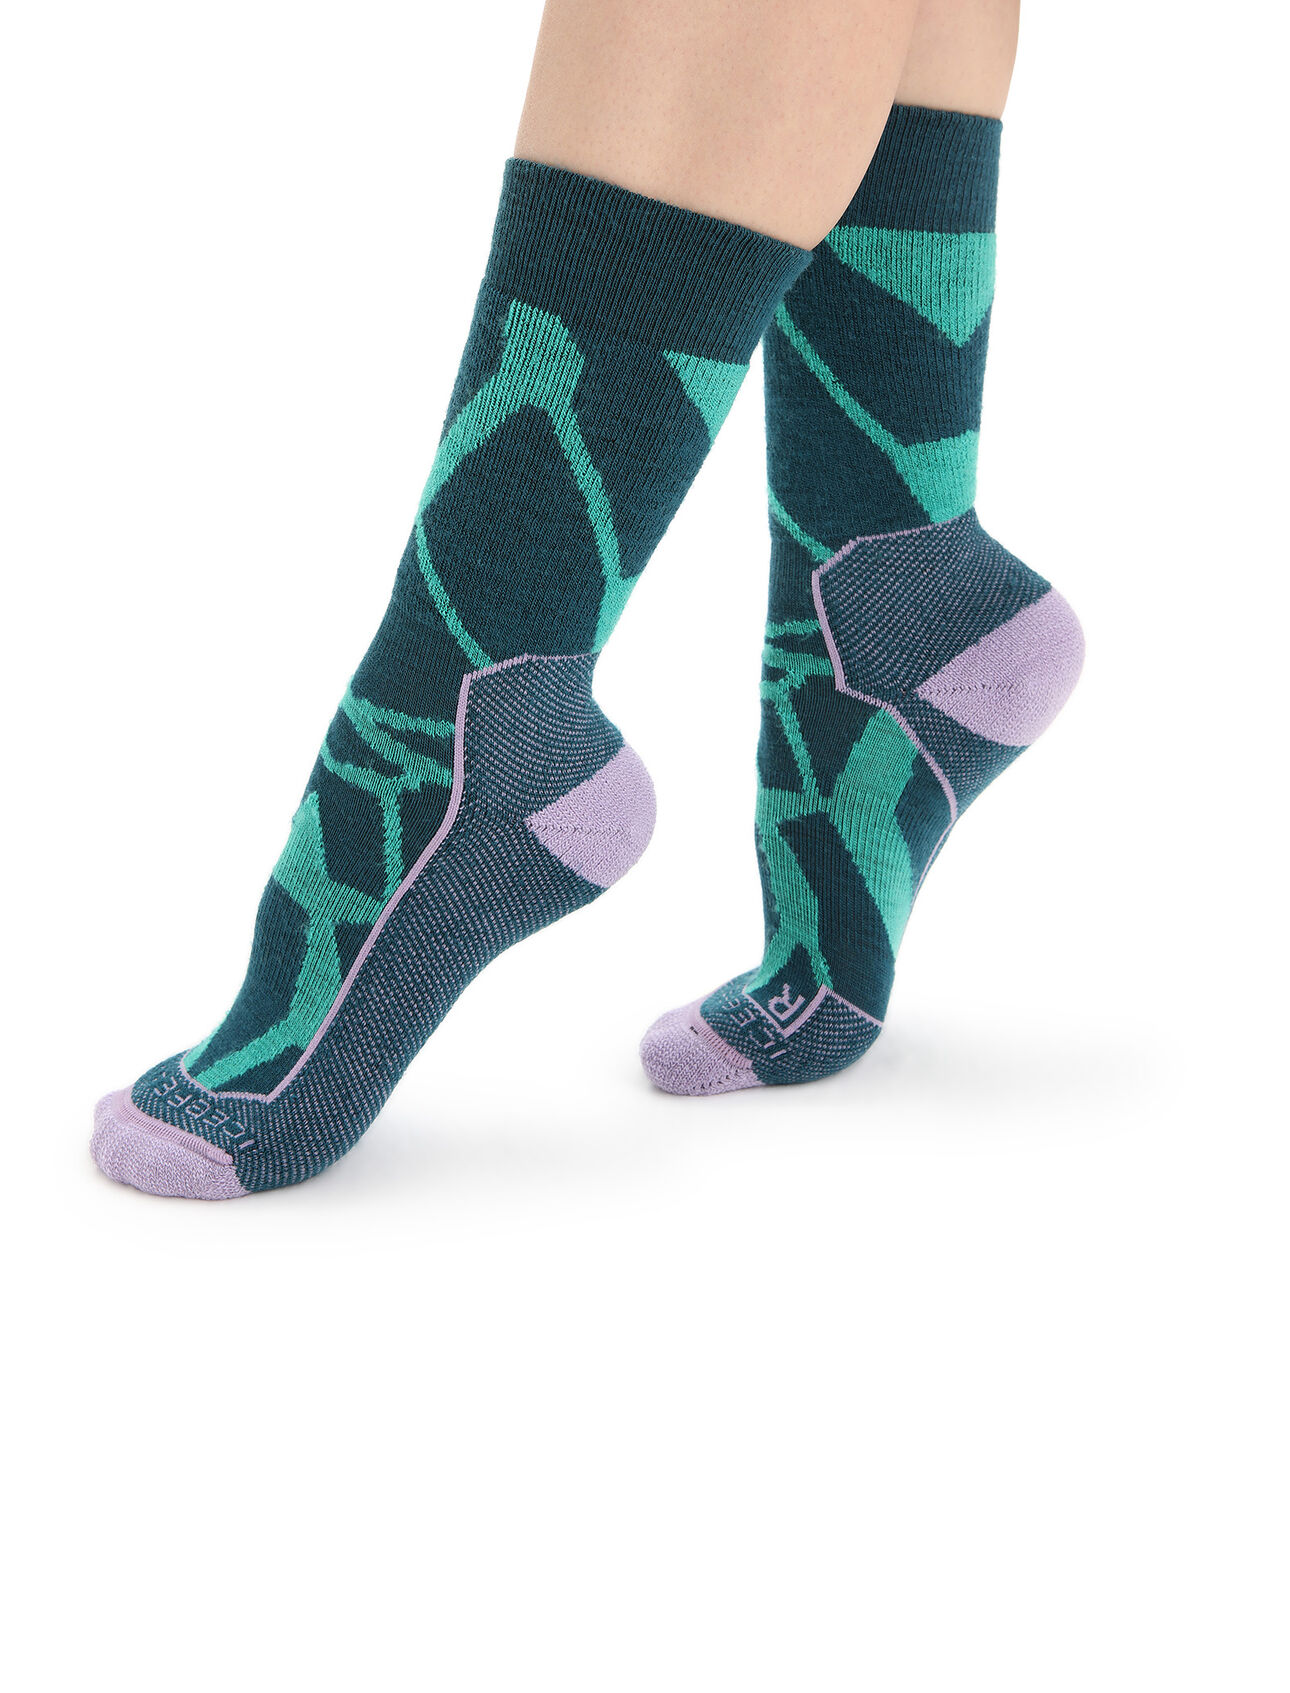 Womens Merino Hike+ Medium Crew Fractured Landscapes Socks Durable, crew-length merino socks that are stretchy and naturally odor-resistant with medium cushion, the Hike+ Medium Crew Fractured Landscapes socks feature an anatomical sculpted design for added support on day hikes and backpacking  trips.